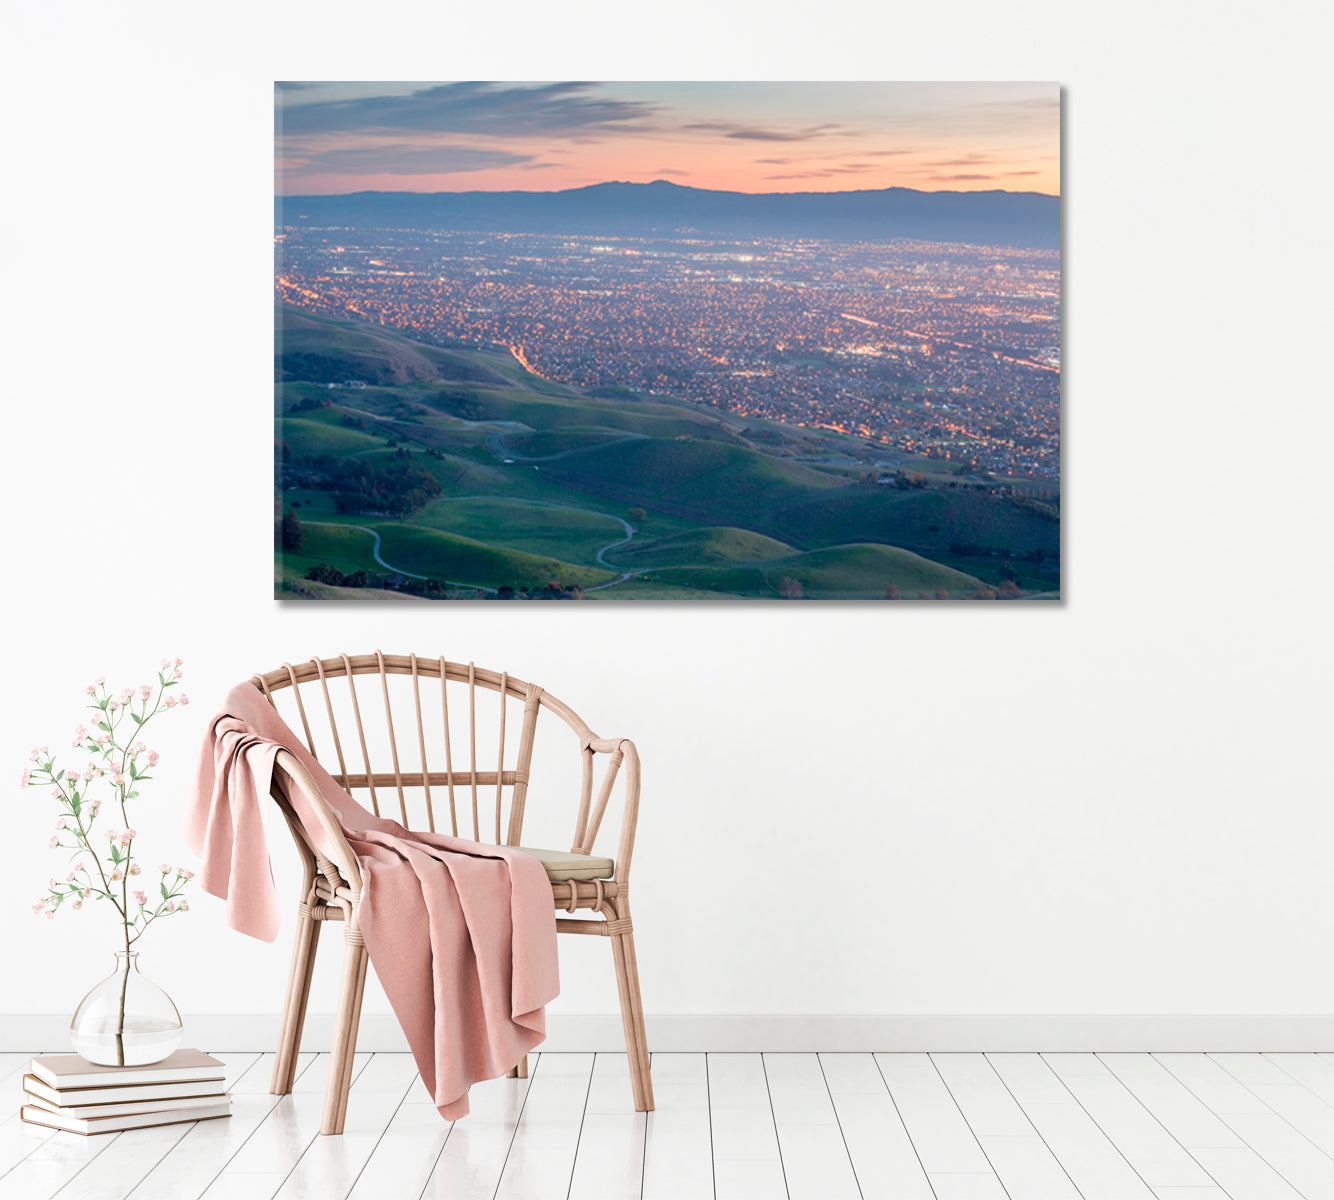 San Jose and Silicon Valley at Sunset California Canvas Print ArtLexy 1 Panel 24"x16" inches 